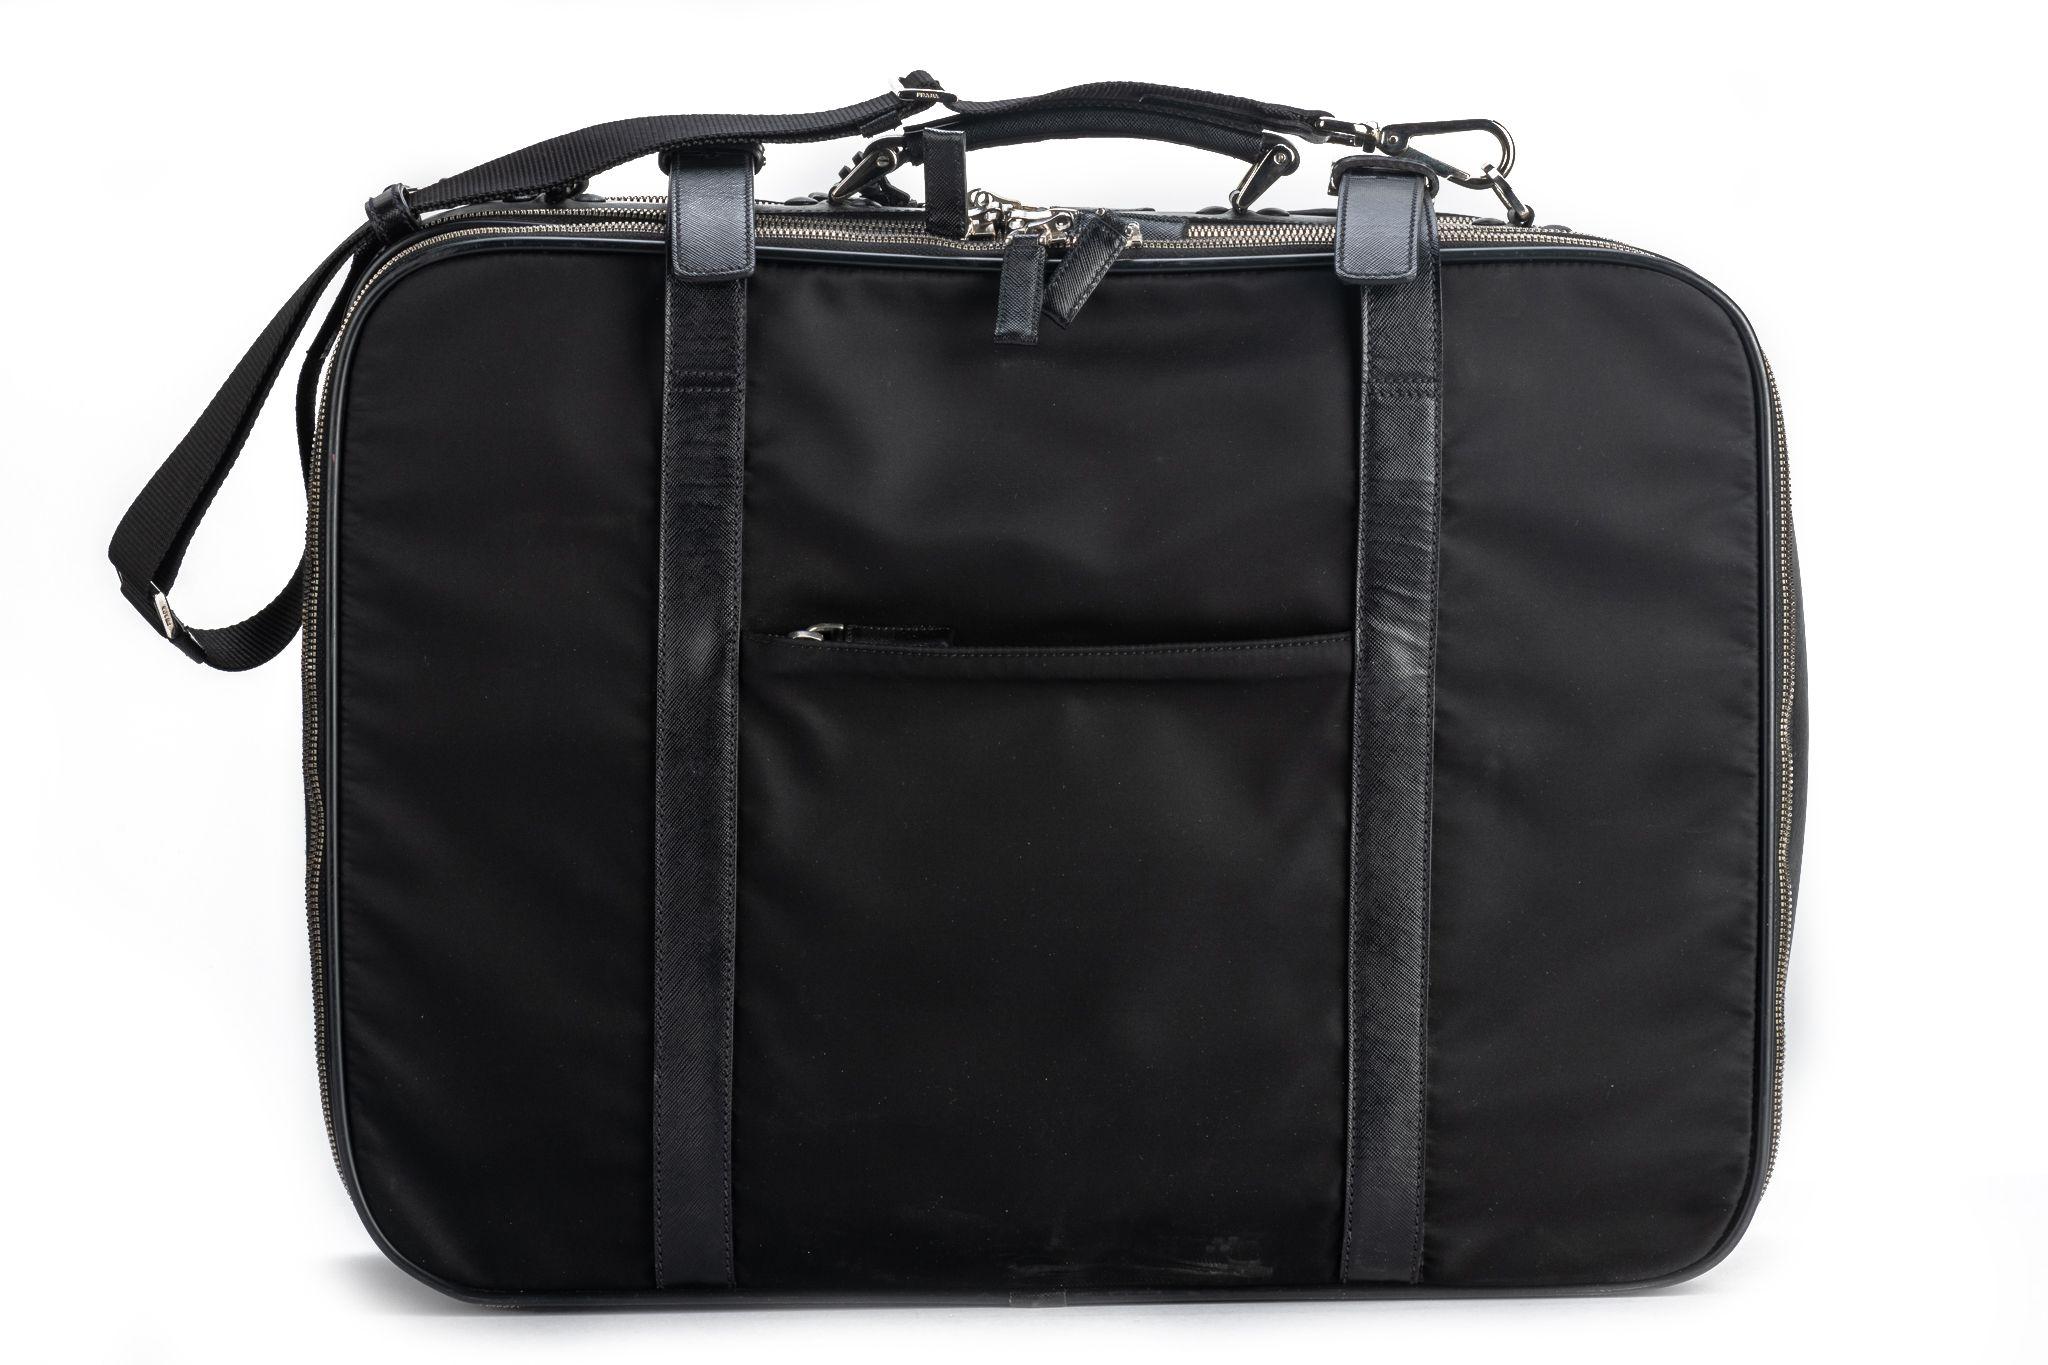 Prada Unisex Black Weekender Suitcase  In Excellent Condition For Sale In West Hollywood, CA